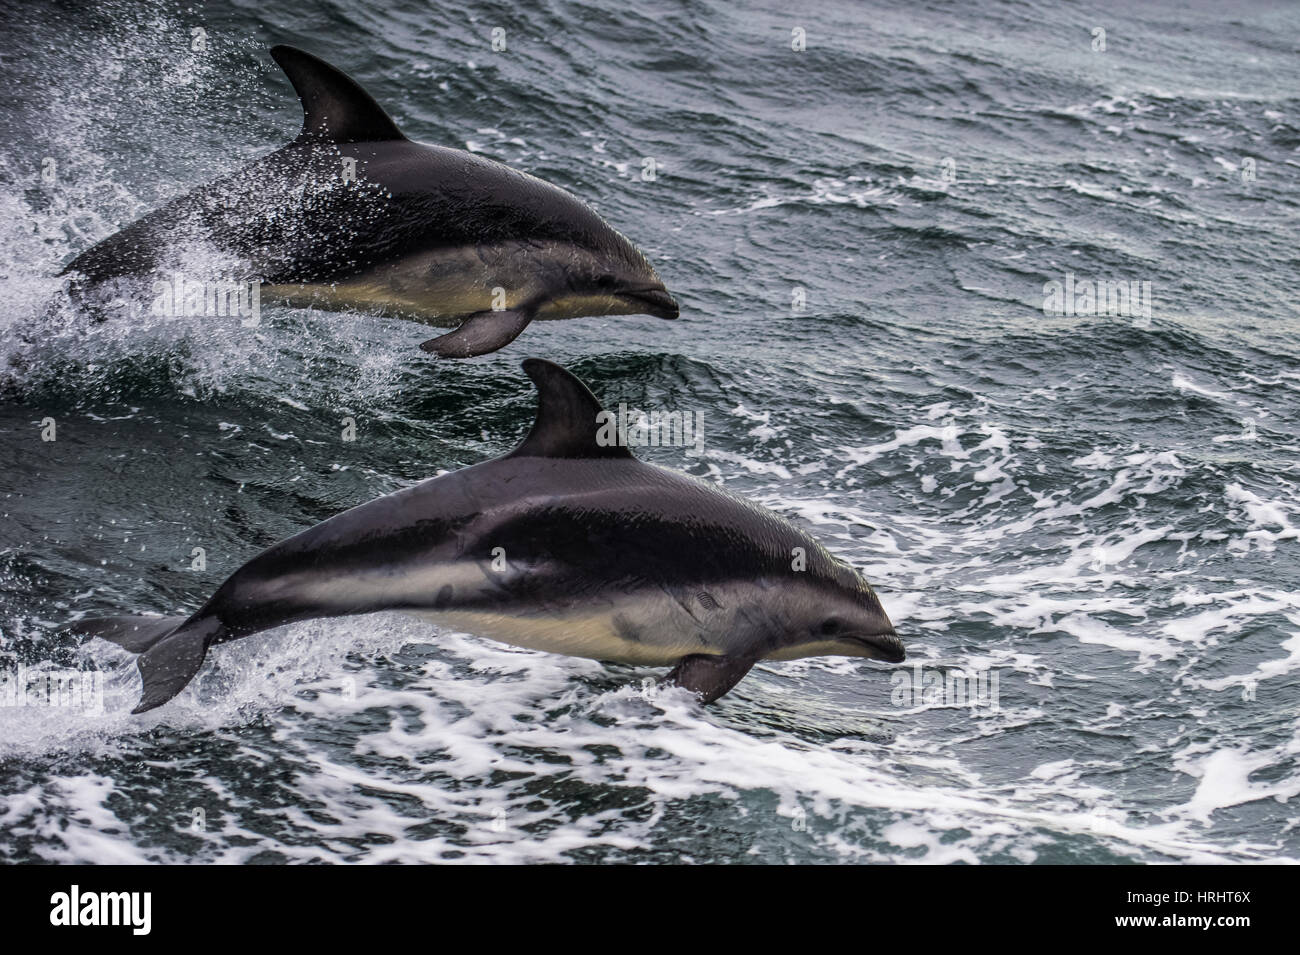 Dusky dolphin (Lagenorhynchus obscurus) jumping, Beagle Channel, Tierra del Fuego, Argentina Stock Photo